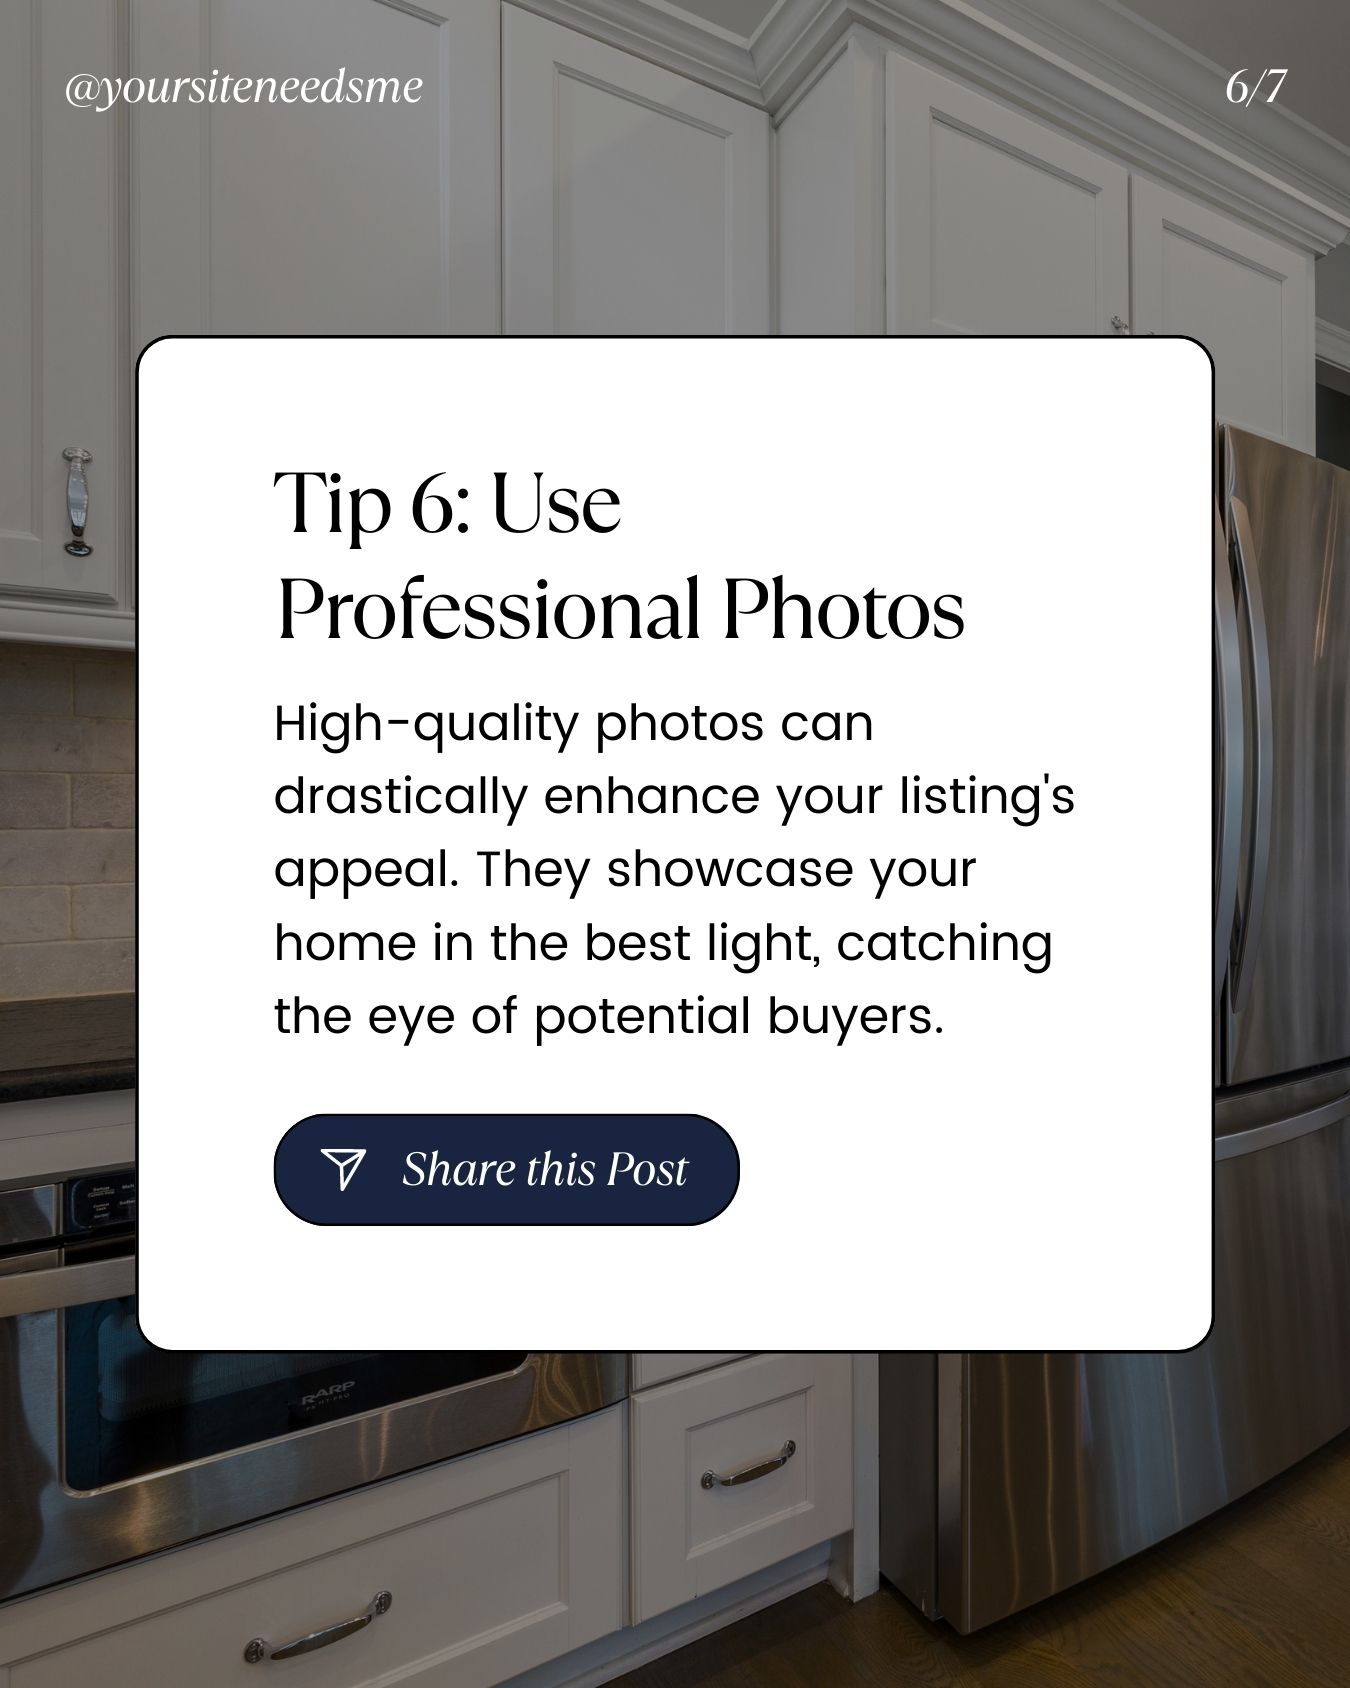 Tips to Sell Your Home 6 Use Professional Photos